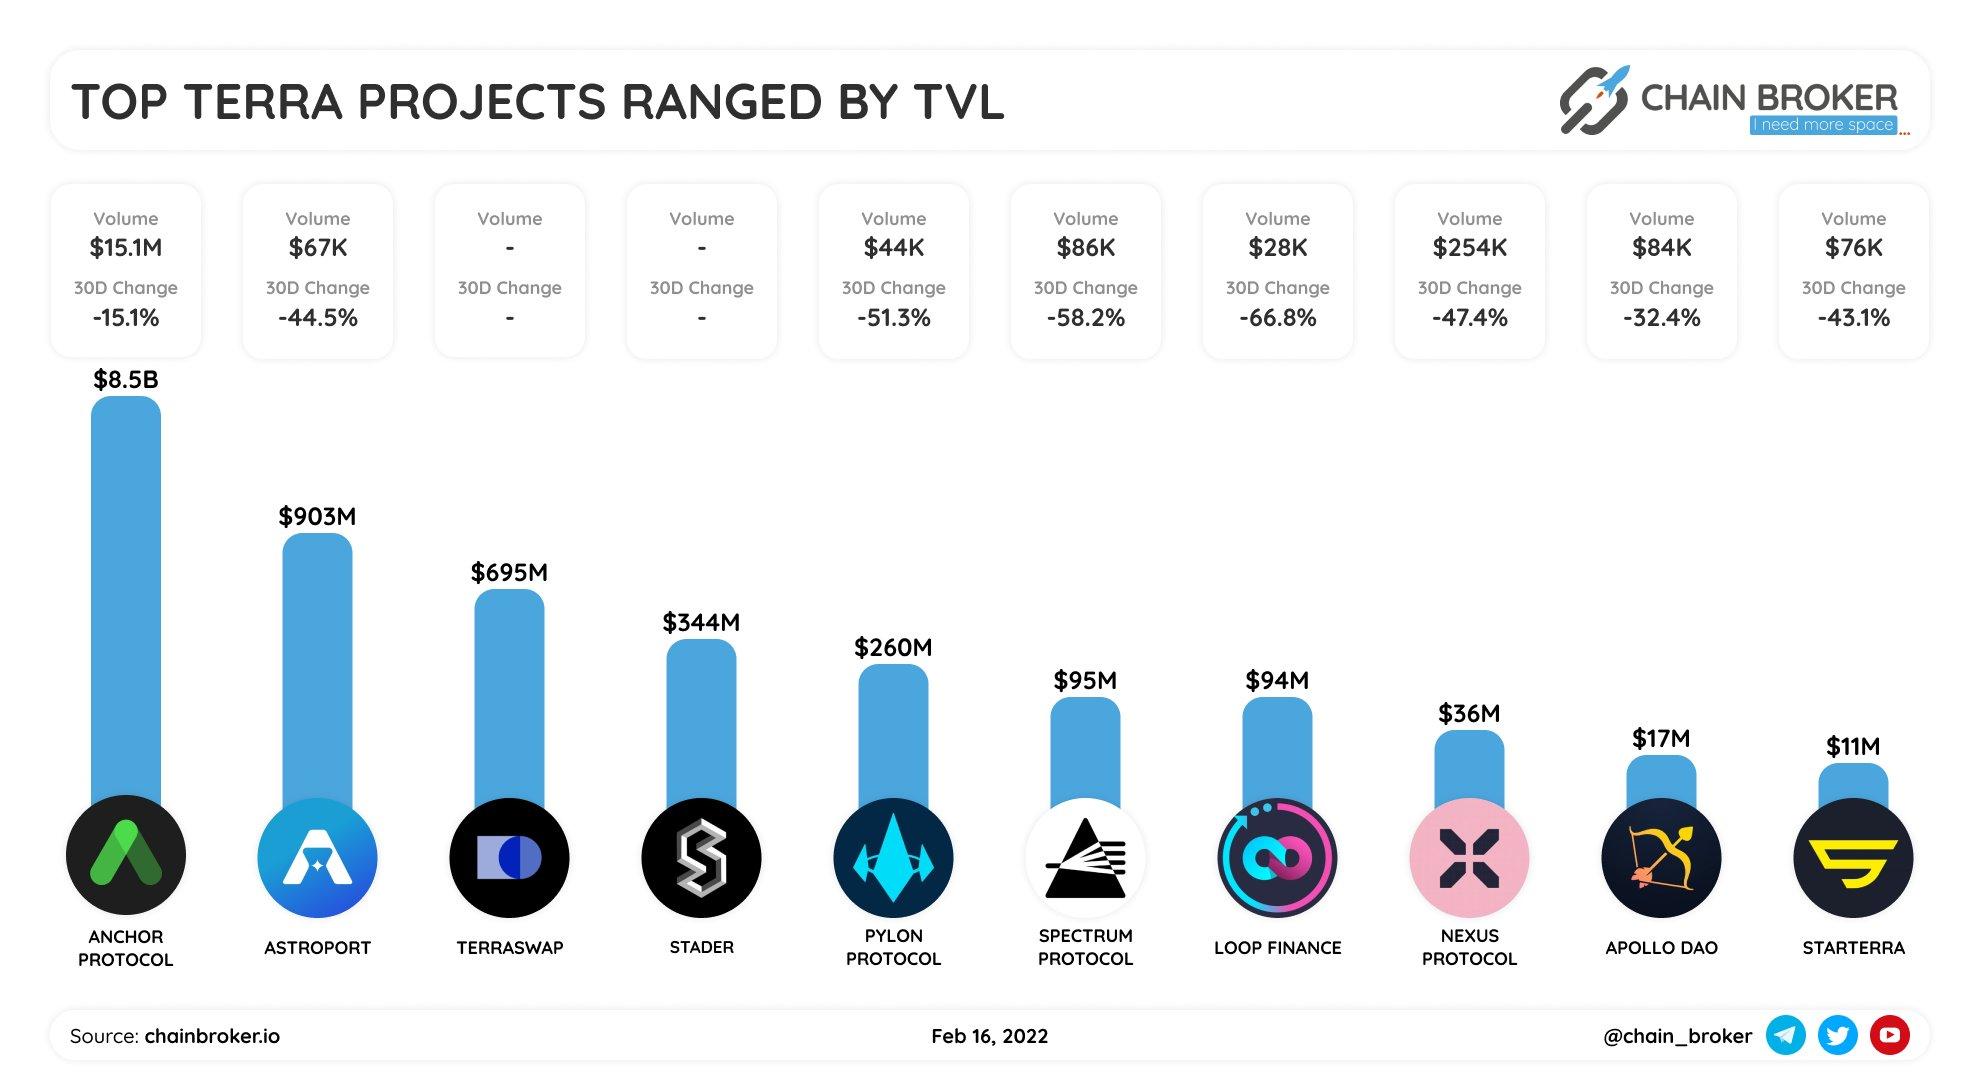 Top terra projects ranged by TVL